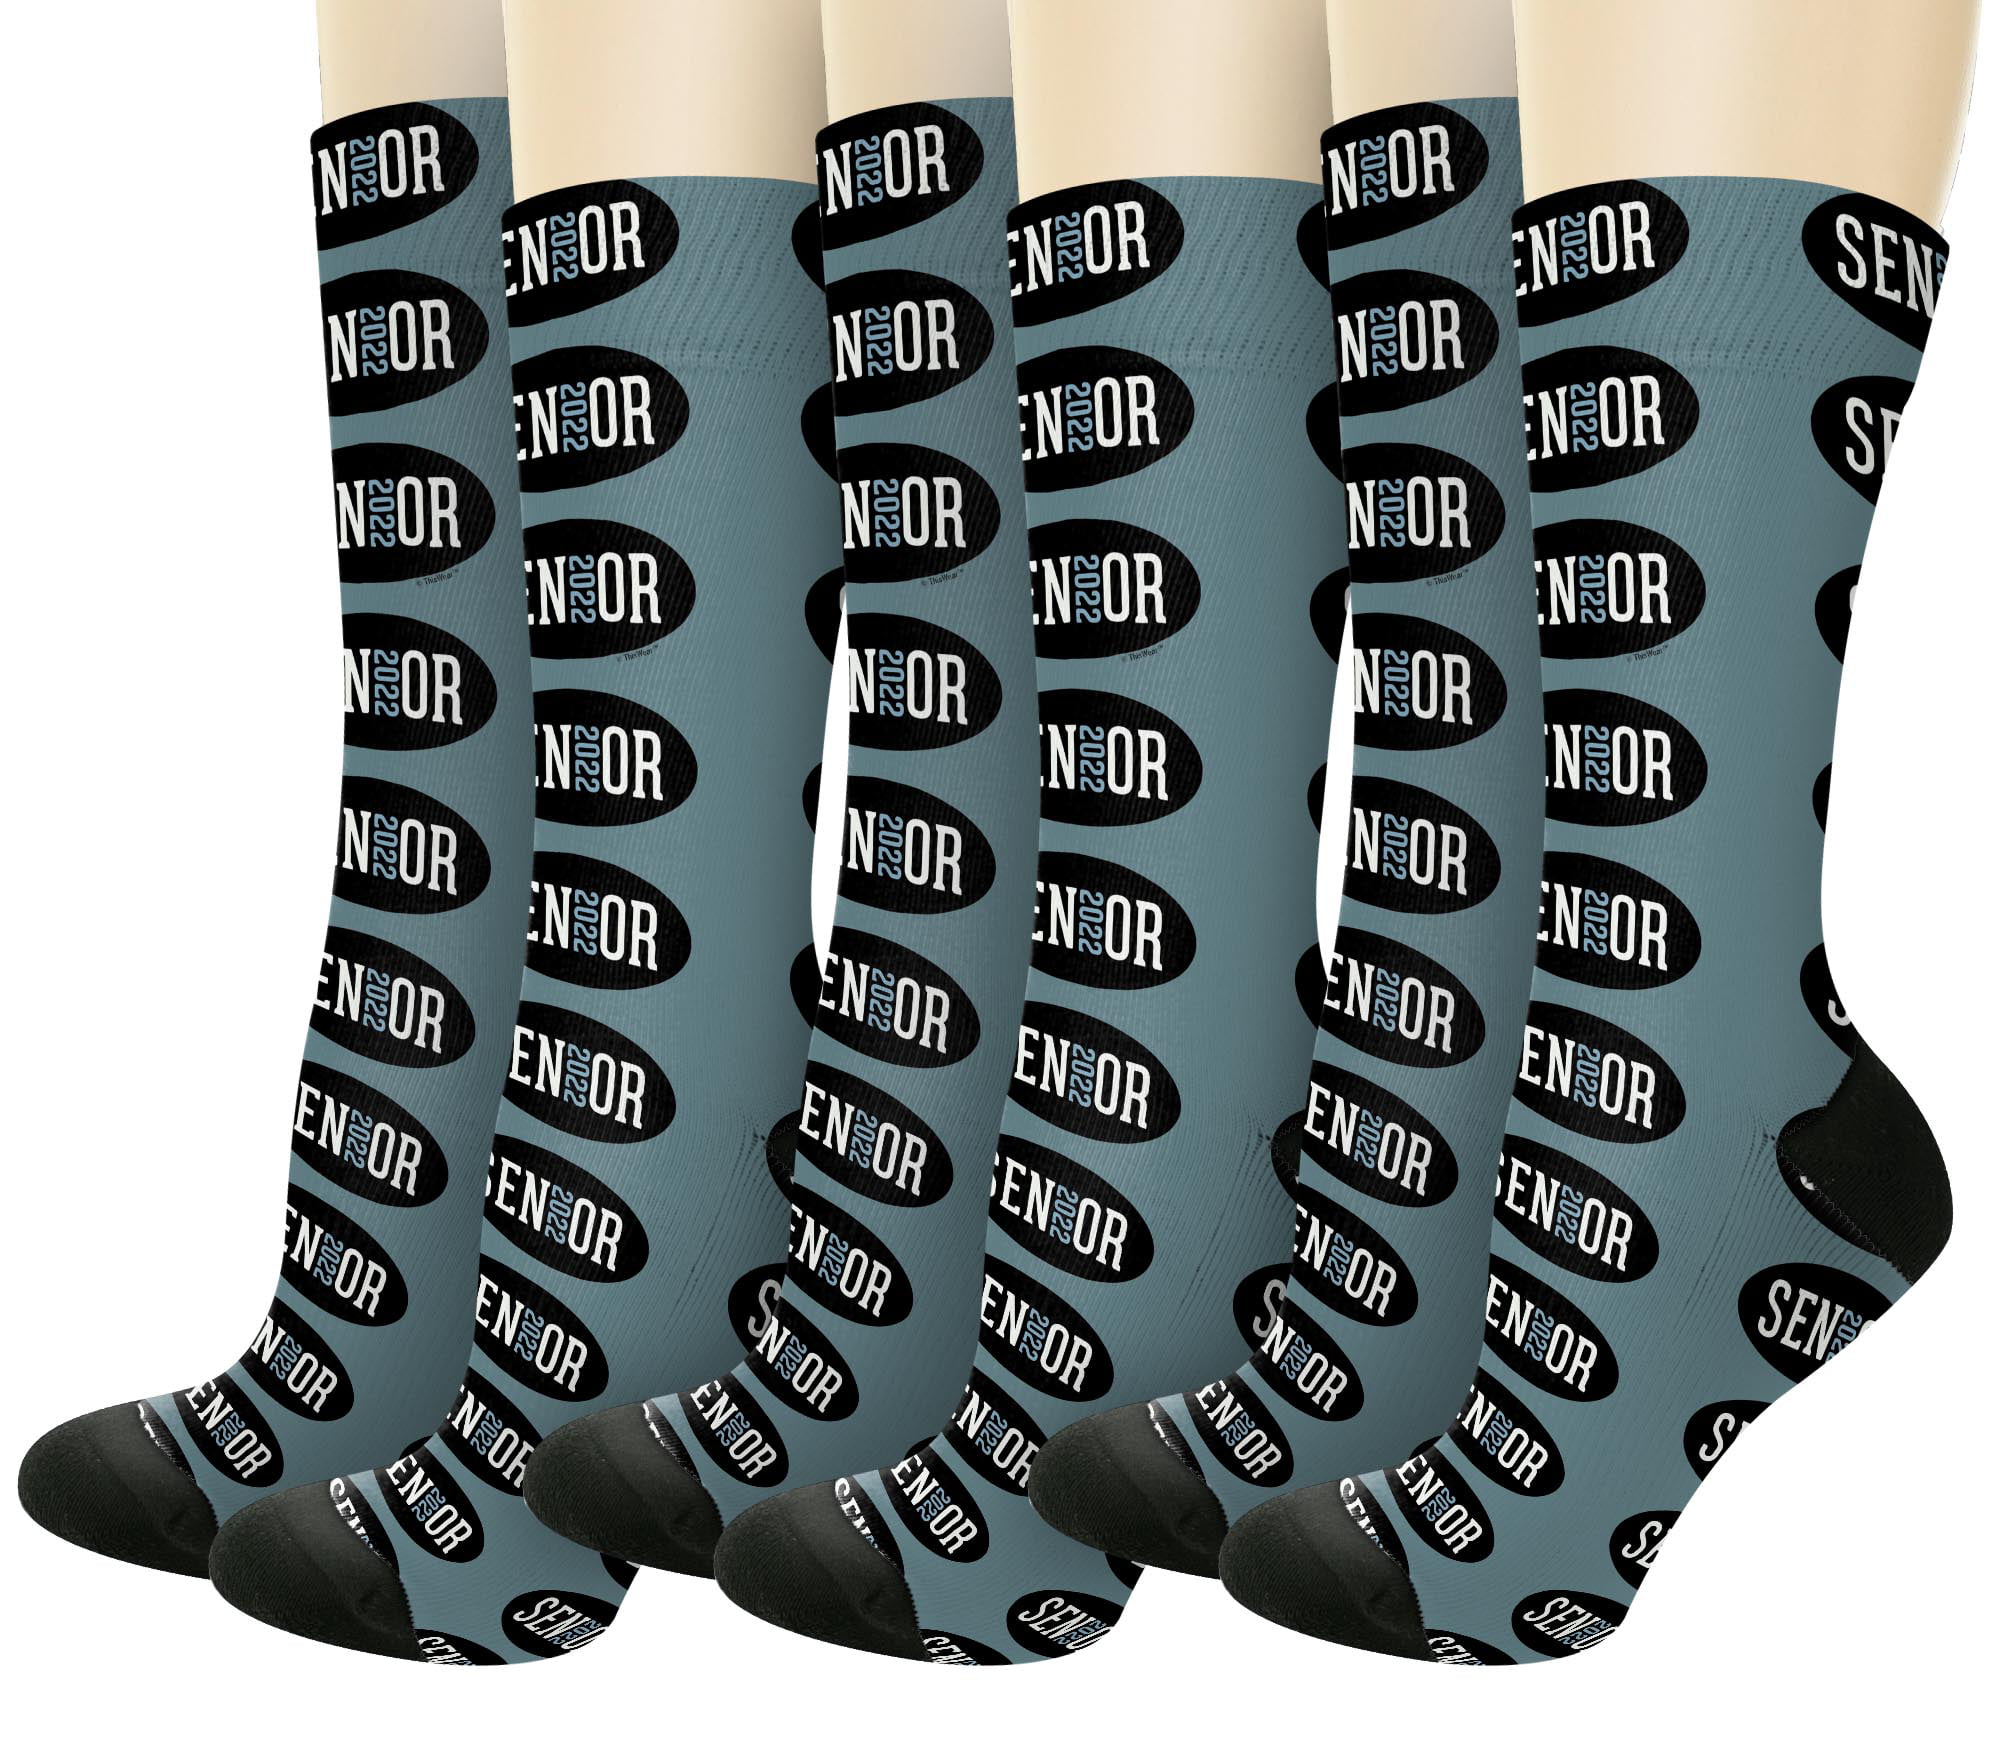 LEVLO Graduation Gift for Him/Her Time for A New Adventure Cotton Socks 2020 Graduation Socks for Women Mens